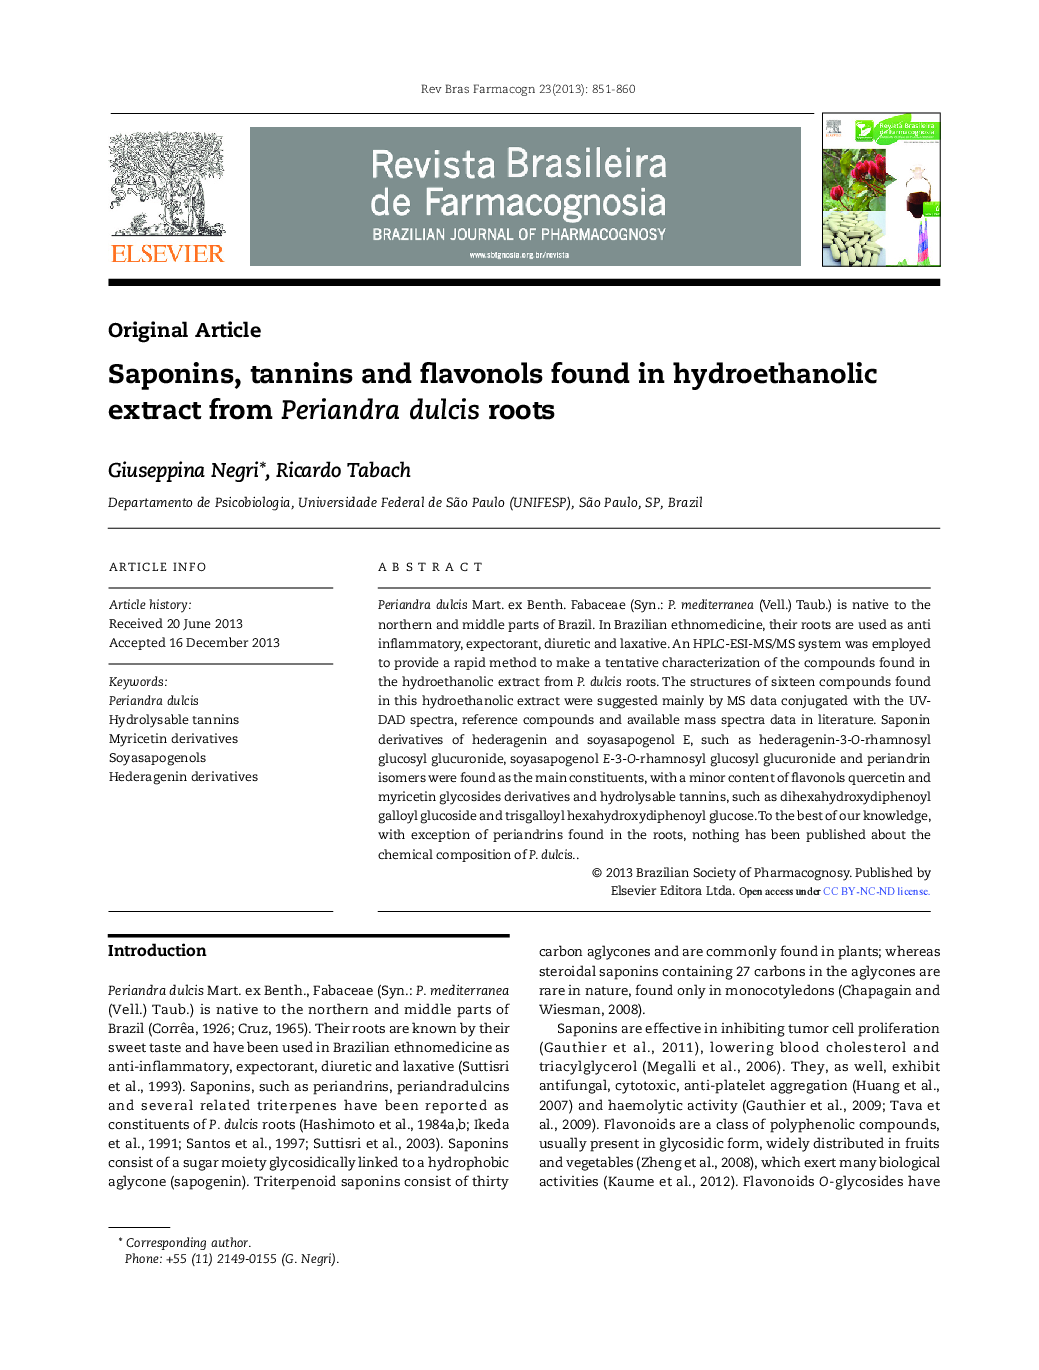 Saponins, tannins and flavonols found in hydroethanolic extract from Periandra dulcis roots